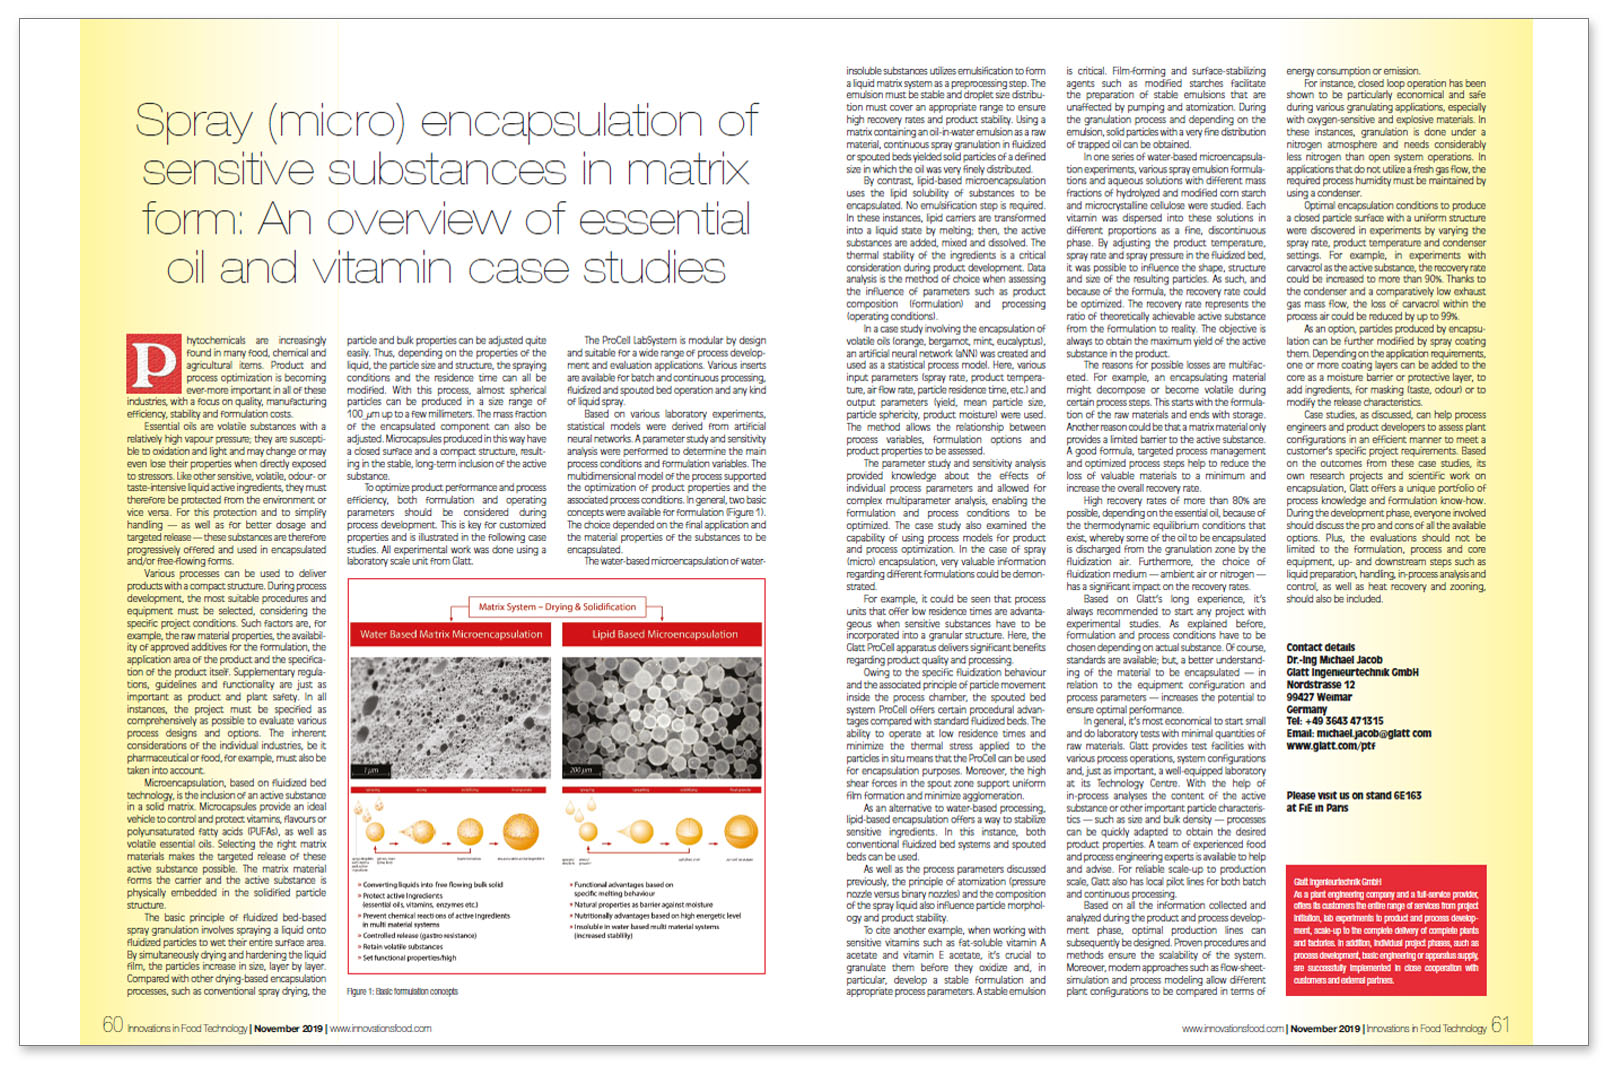 Glatt technical article on 'Spray (micro)encapsulation of sensitive substances in matrix form', published in the trade magazine 'Innovations in Food Technology', issue 11/2019